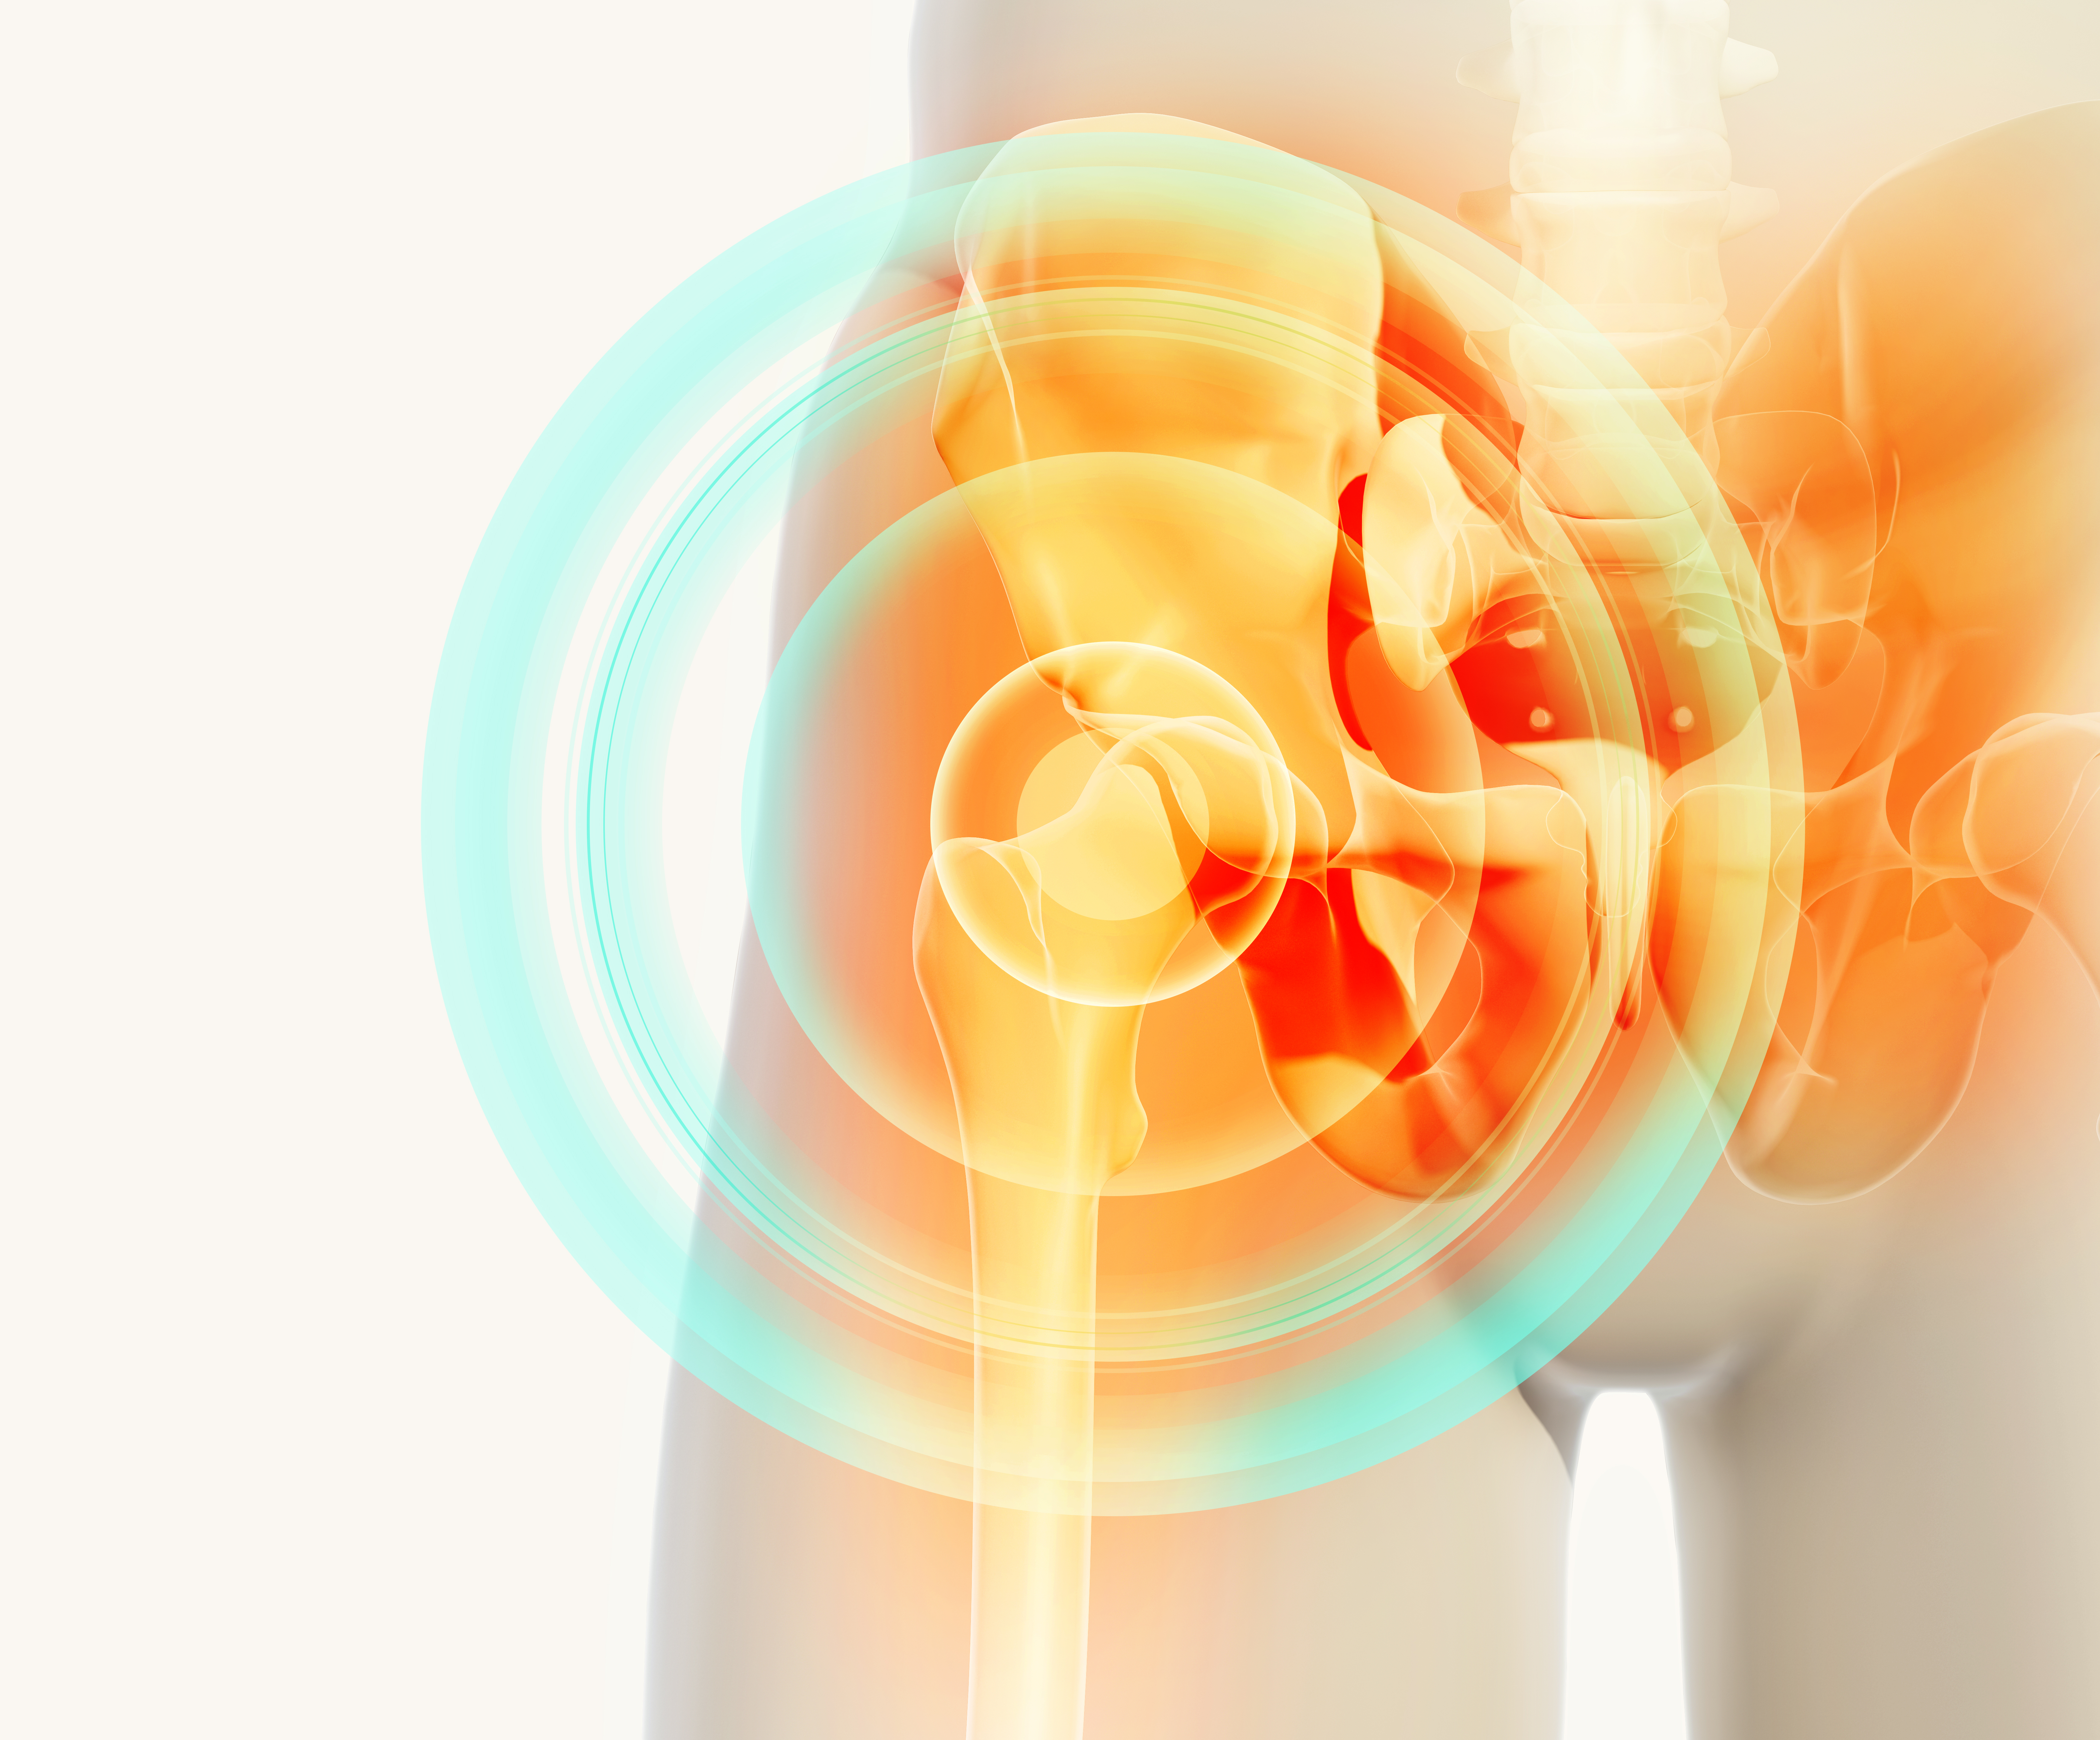 Is a Tense Pelvic Floor the Cause of Your Pain?